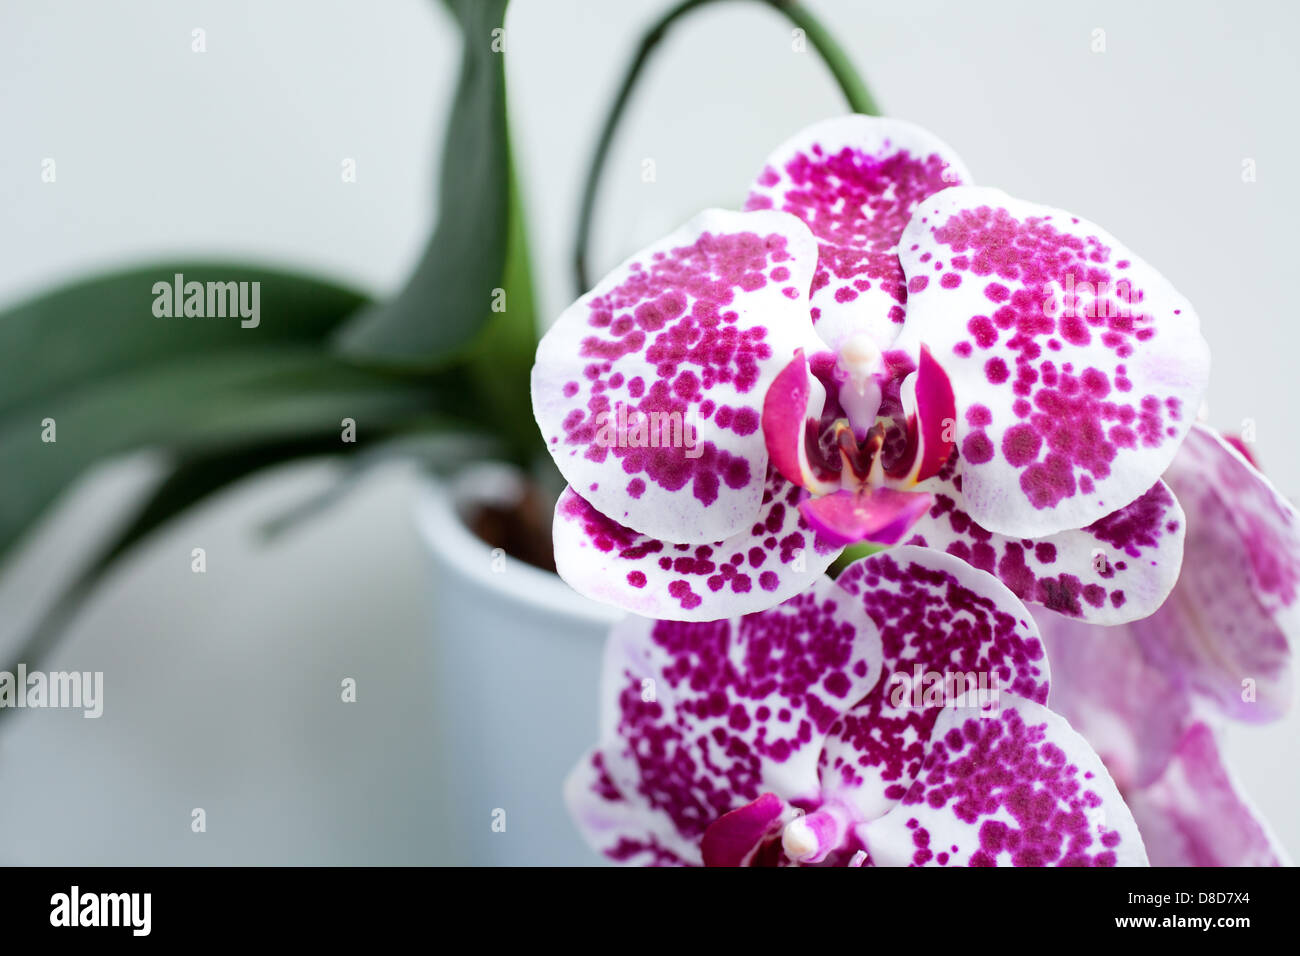 Pink and white Phalaenopsis orchid flower on a white background. Stock Photo